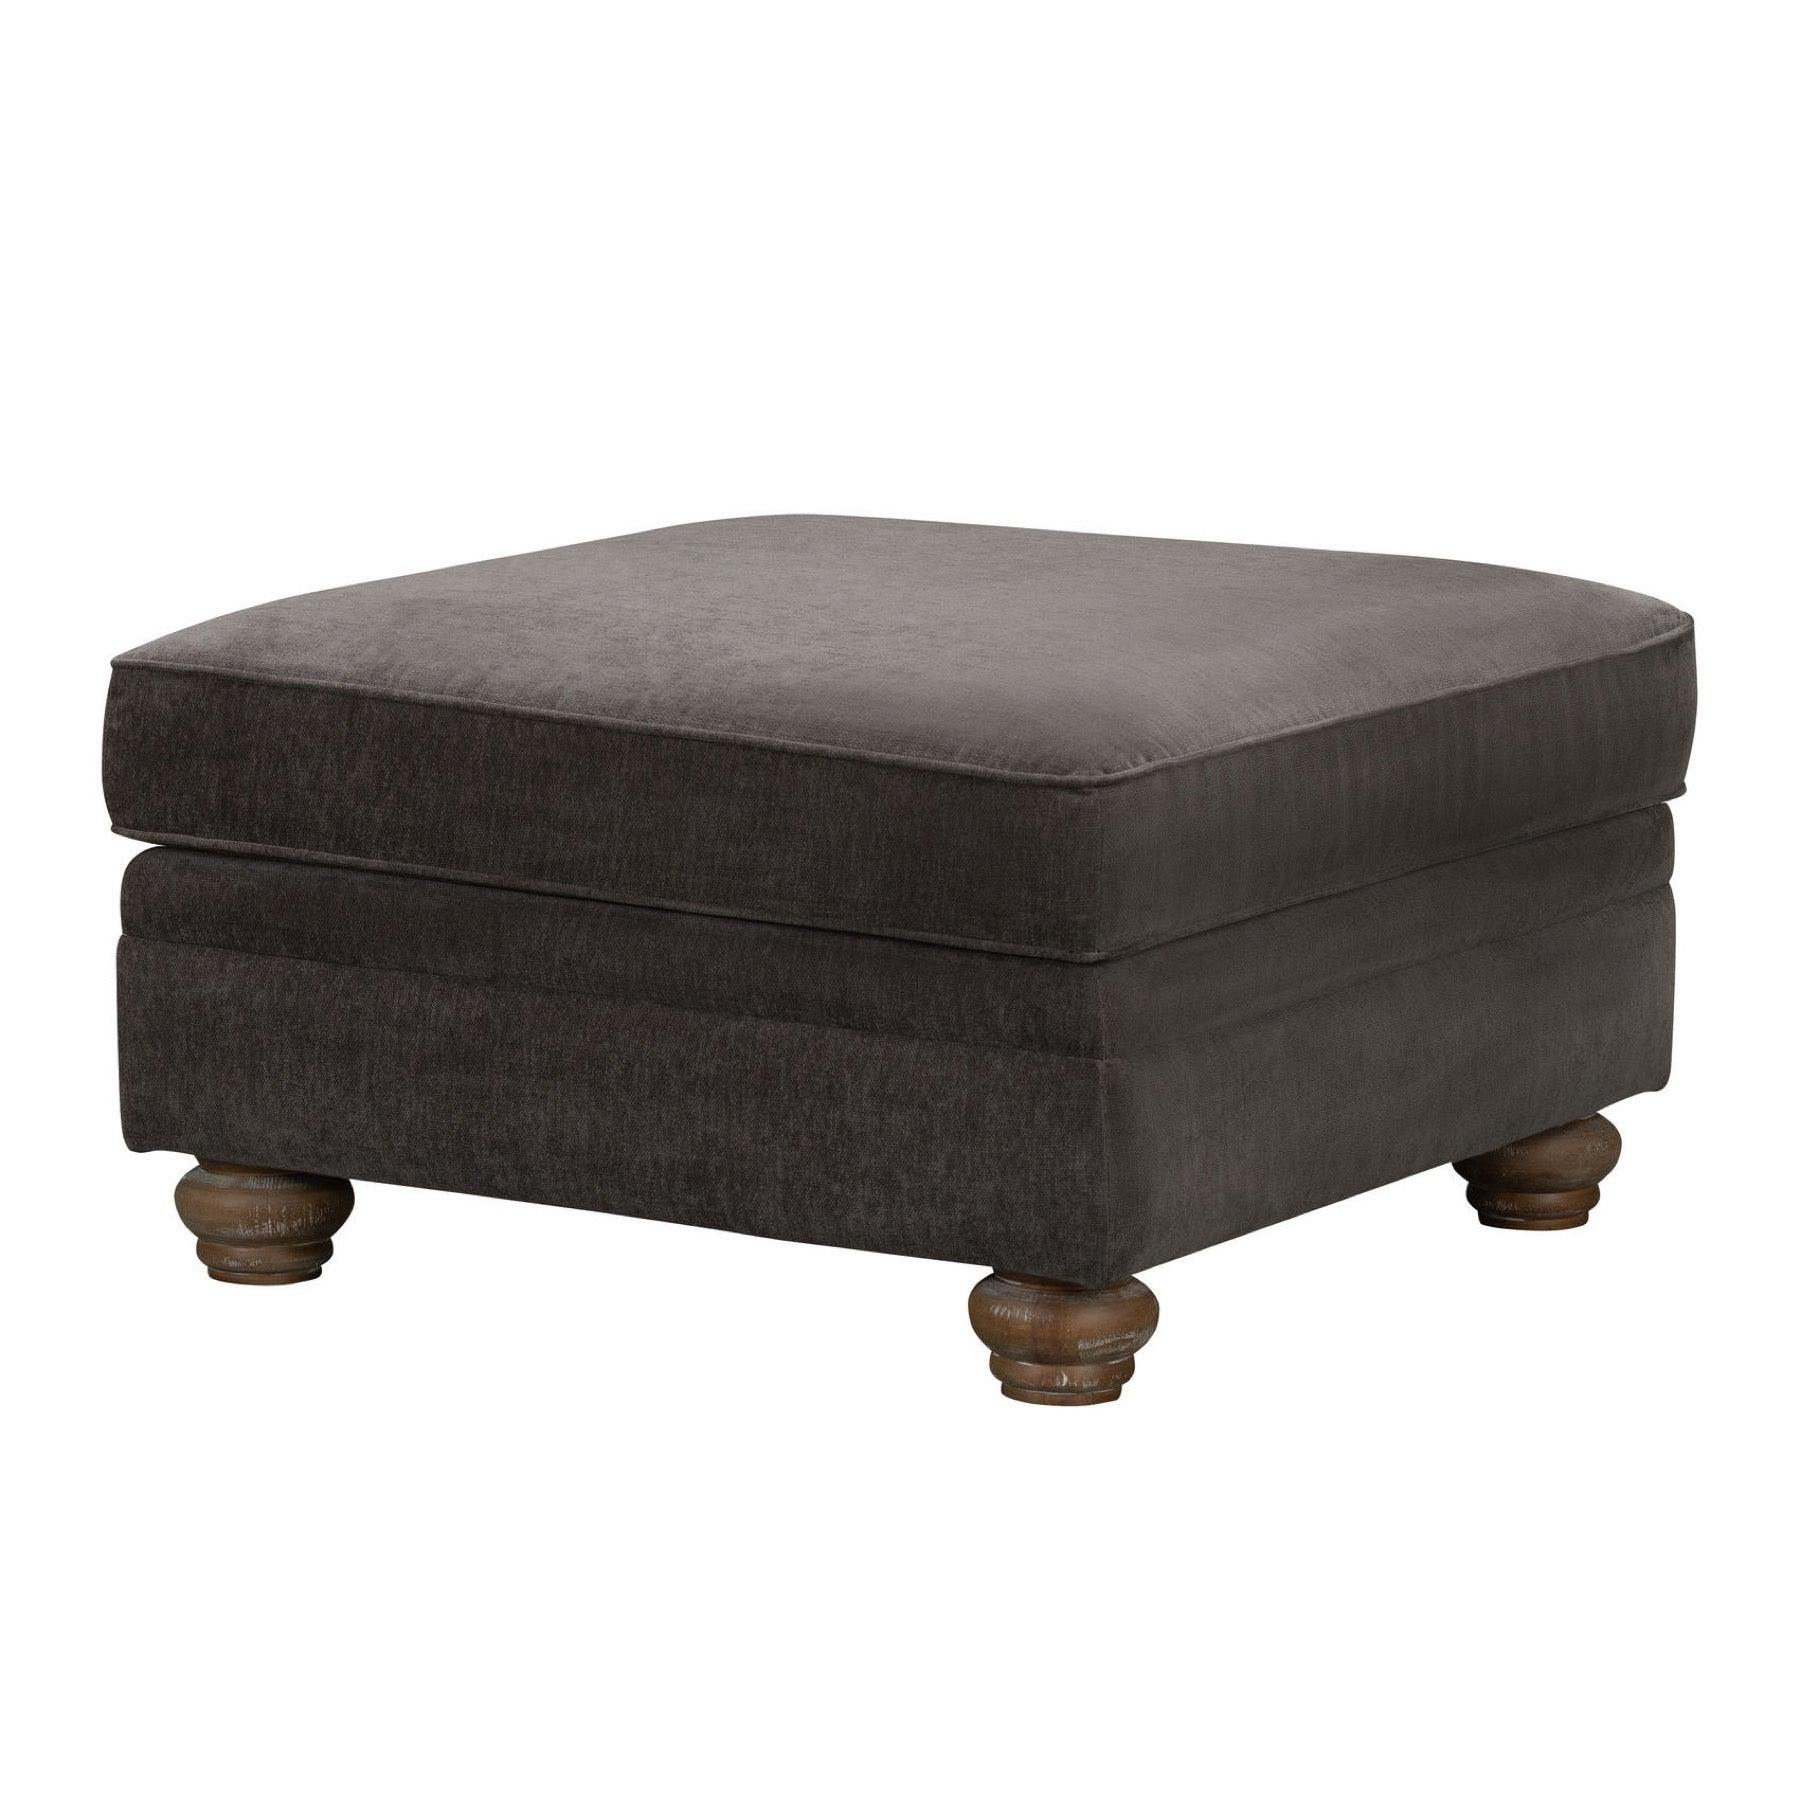 View Windsor Ottoman Foot Stool information